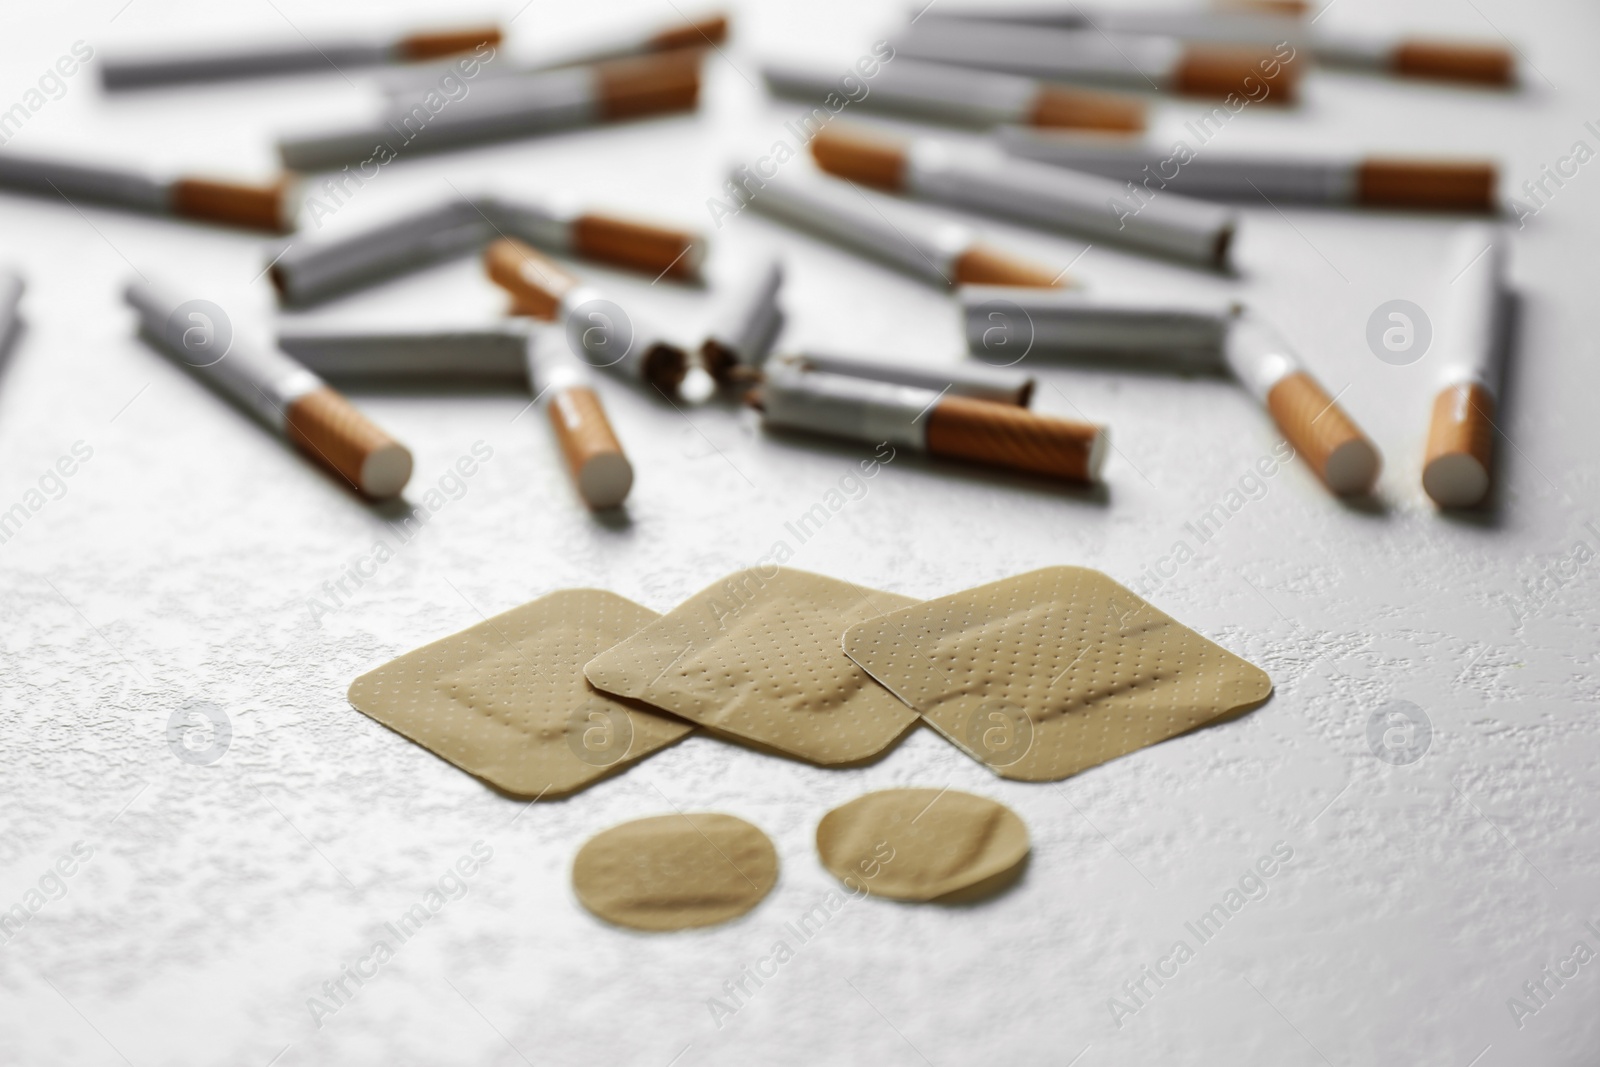 Photo of Nicotine patches and cigarettes on white table, closeup